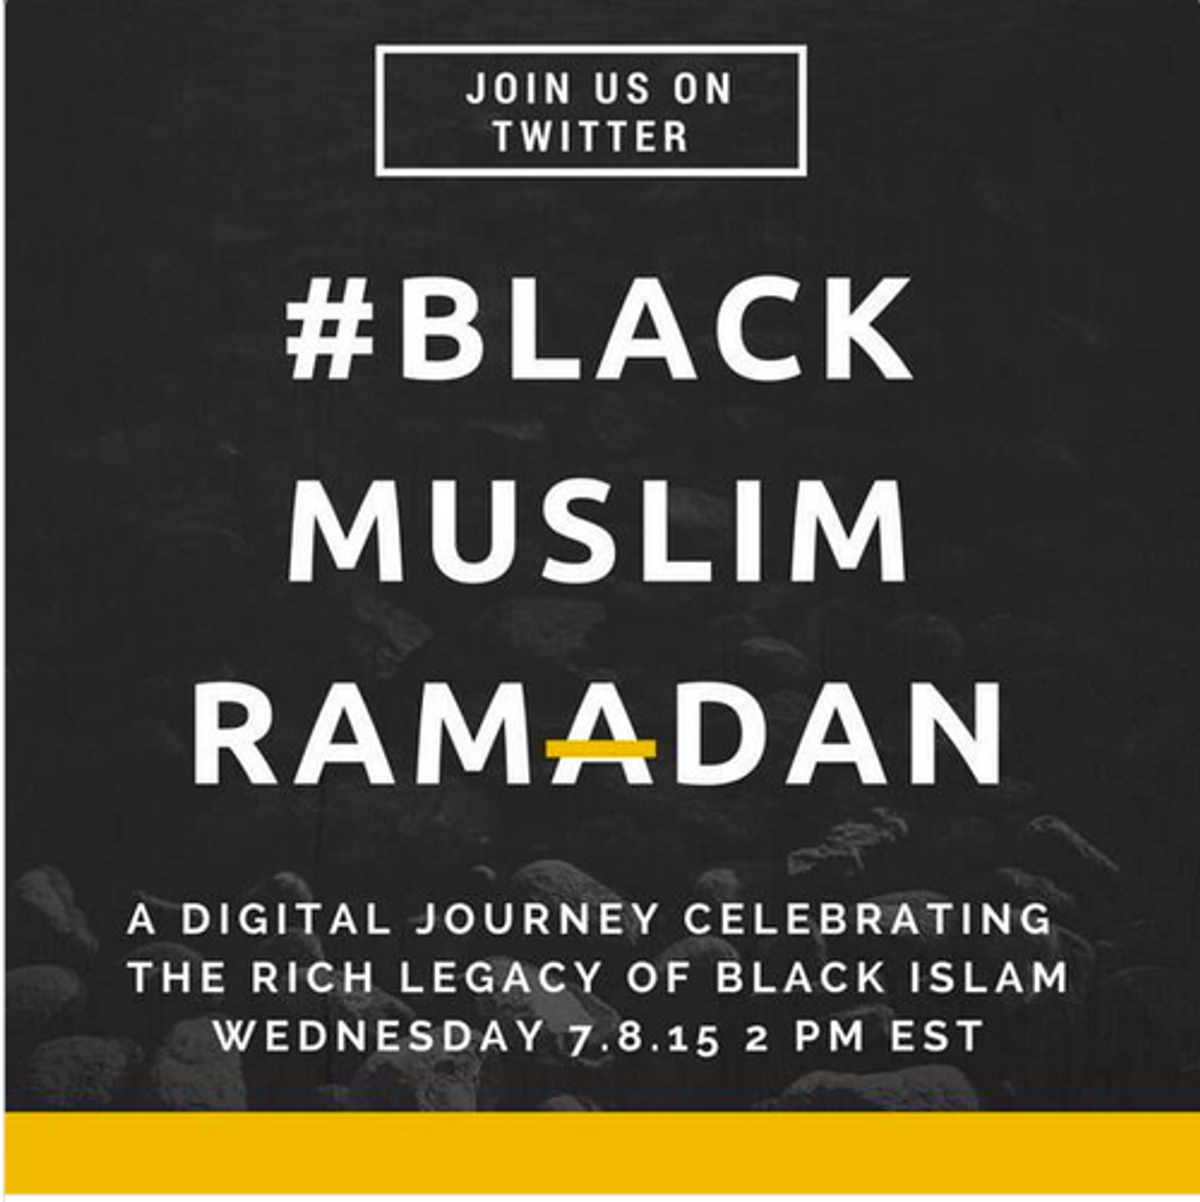 #BlackMuslimRamadan: How a Single Hash tag Is Challenging How We Talk About Islam